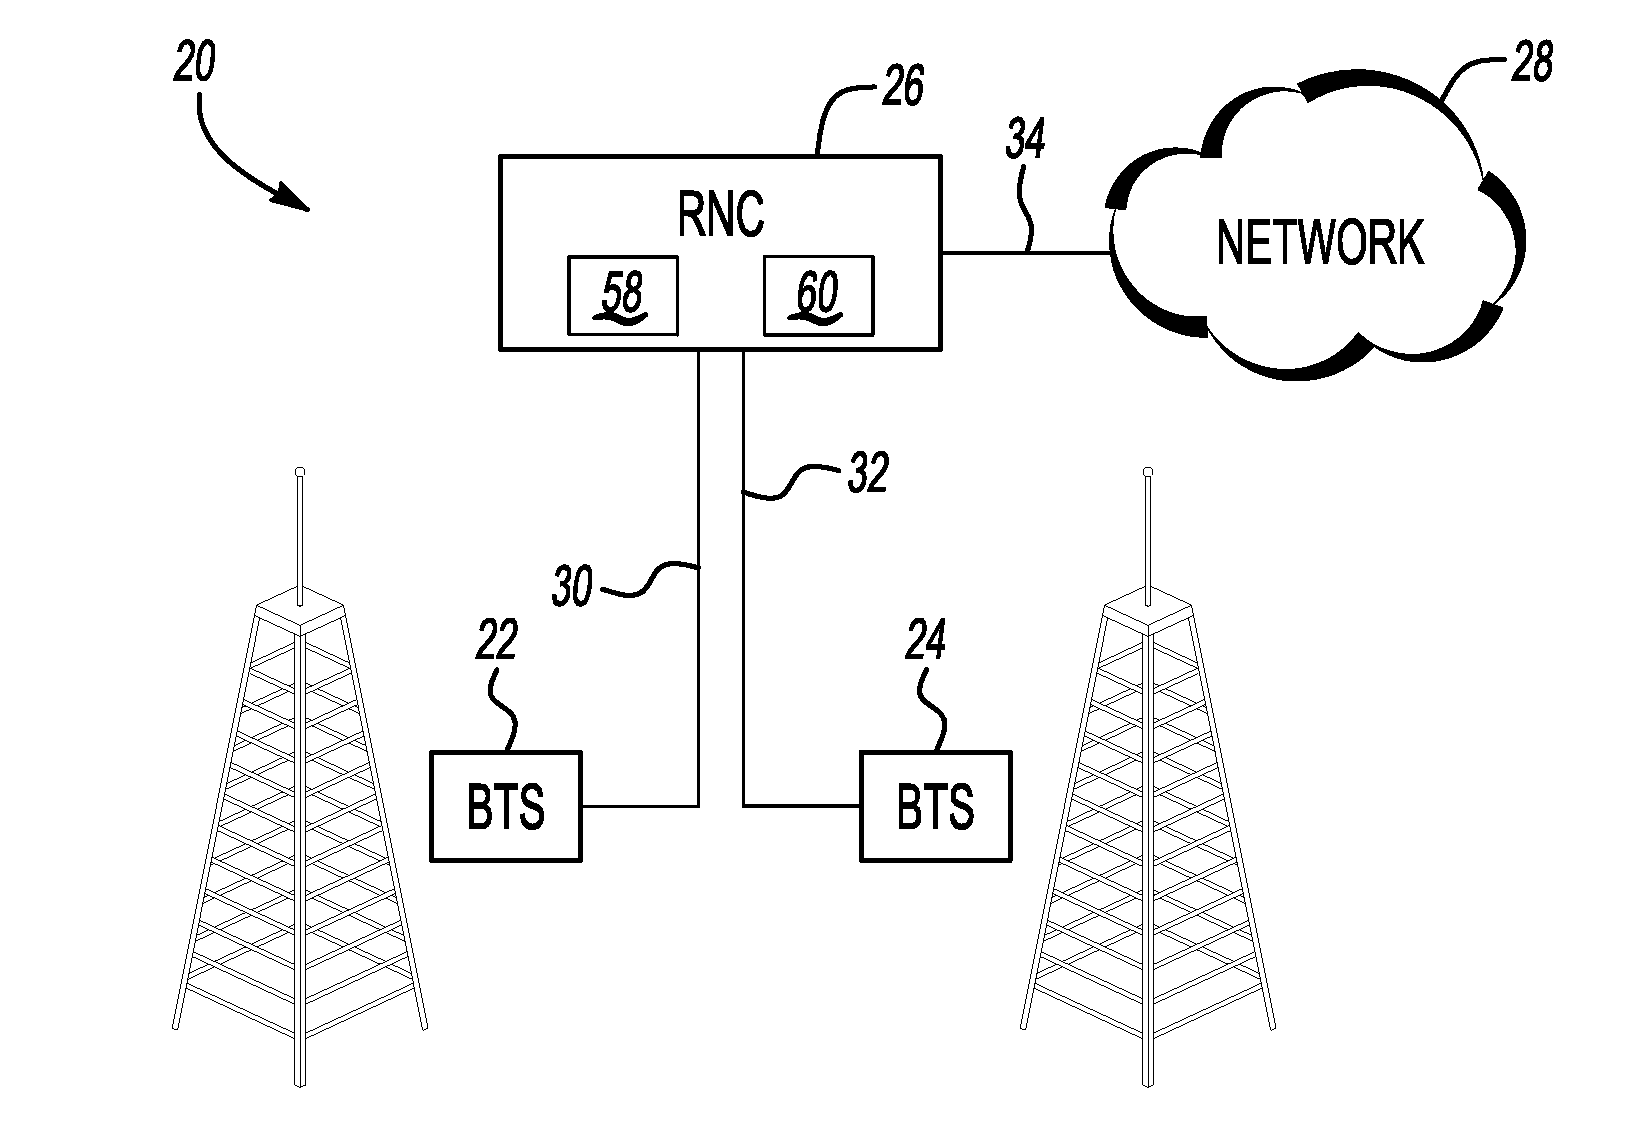 Bandwidth packing rate controller for optimizing resource utilization